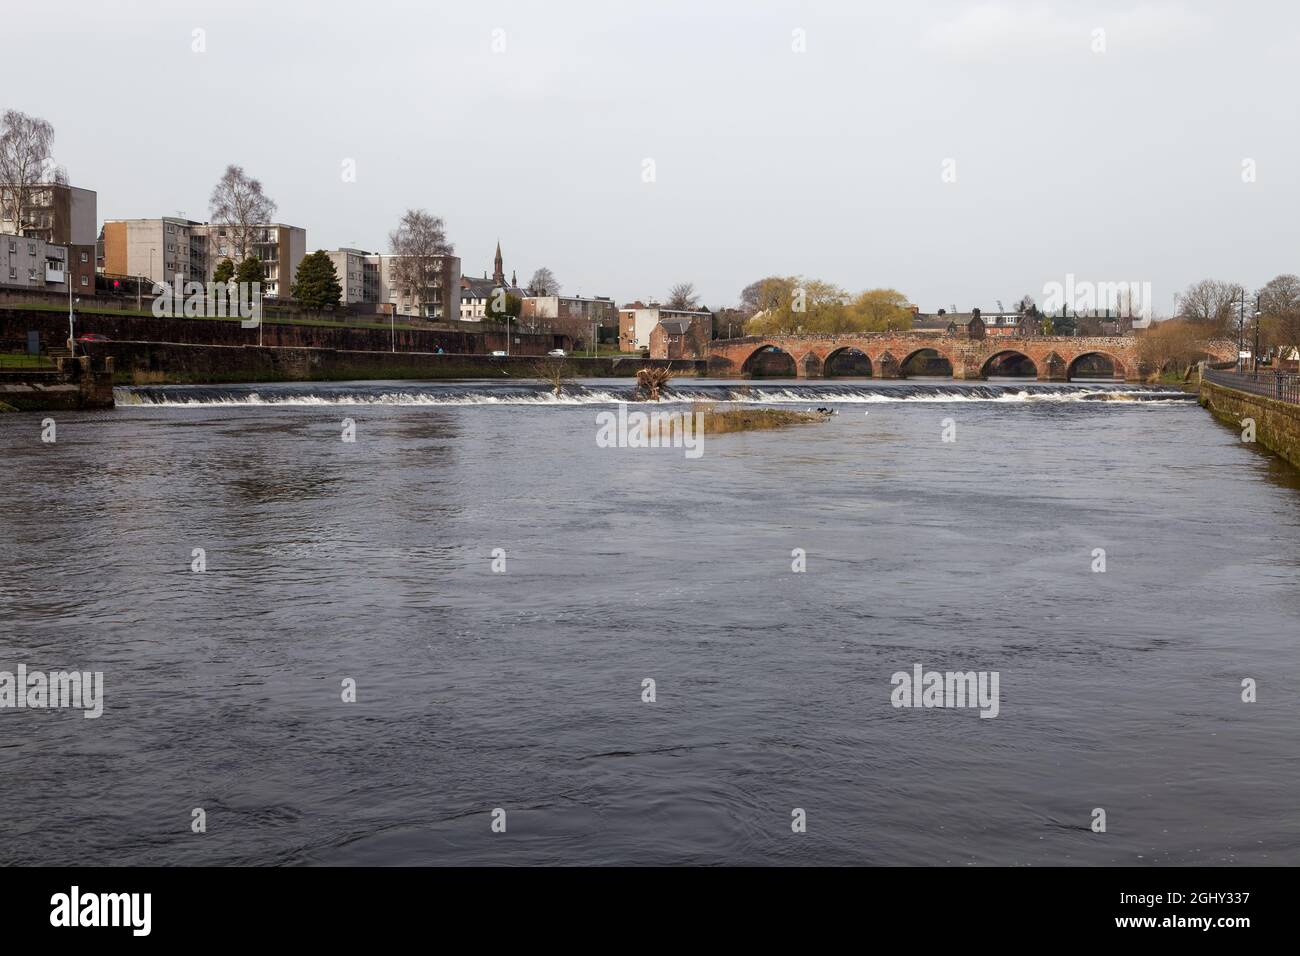 The Caul, a weir in Dumfries, which is the normal tidal limit for the River Nith Stock Photo